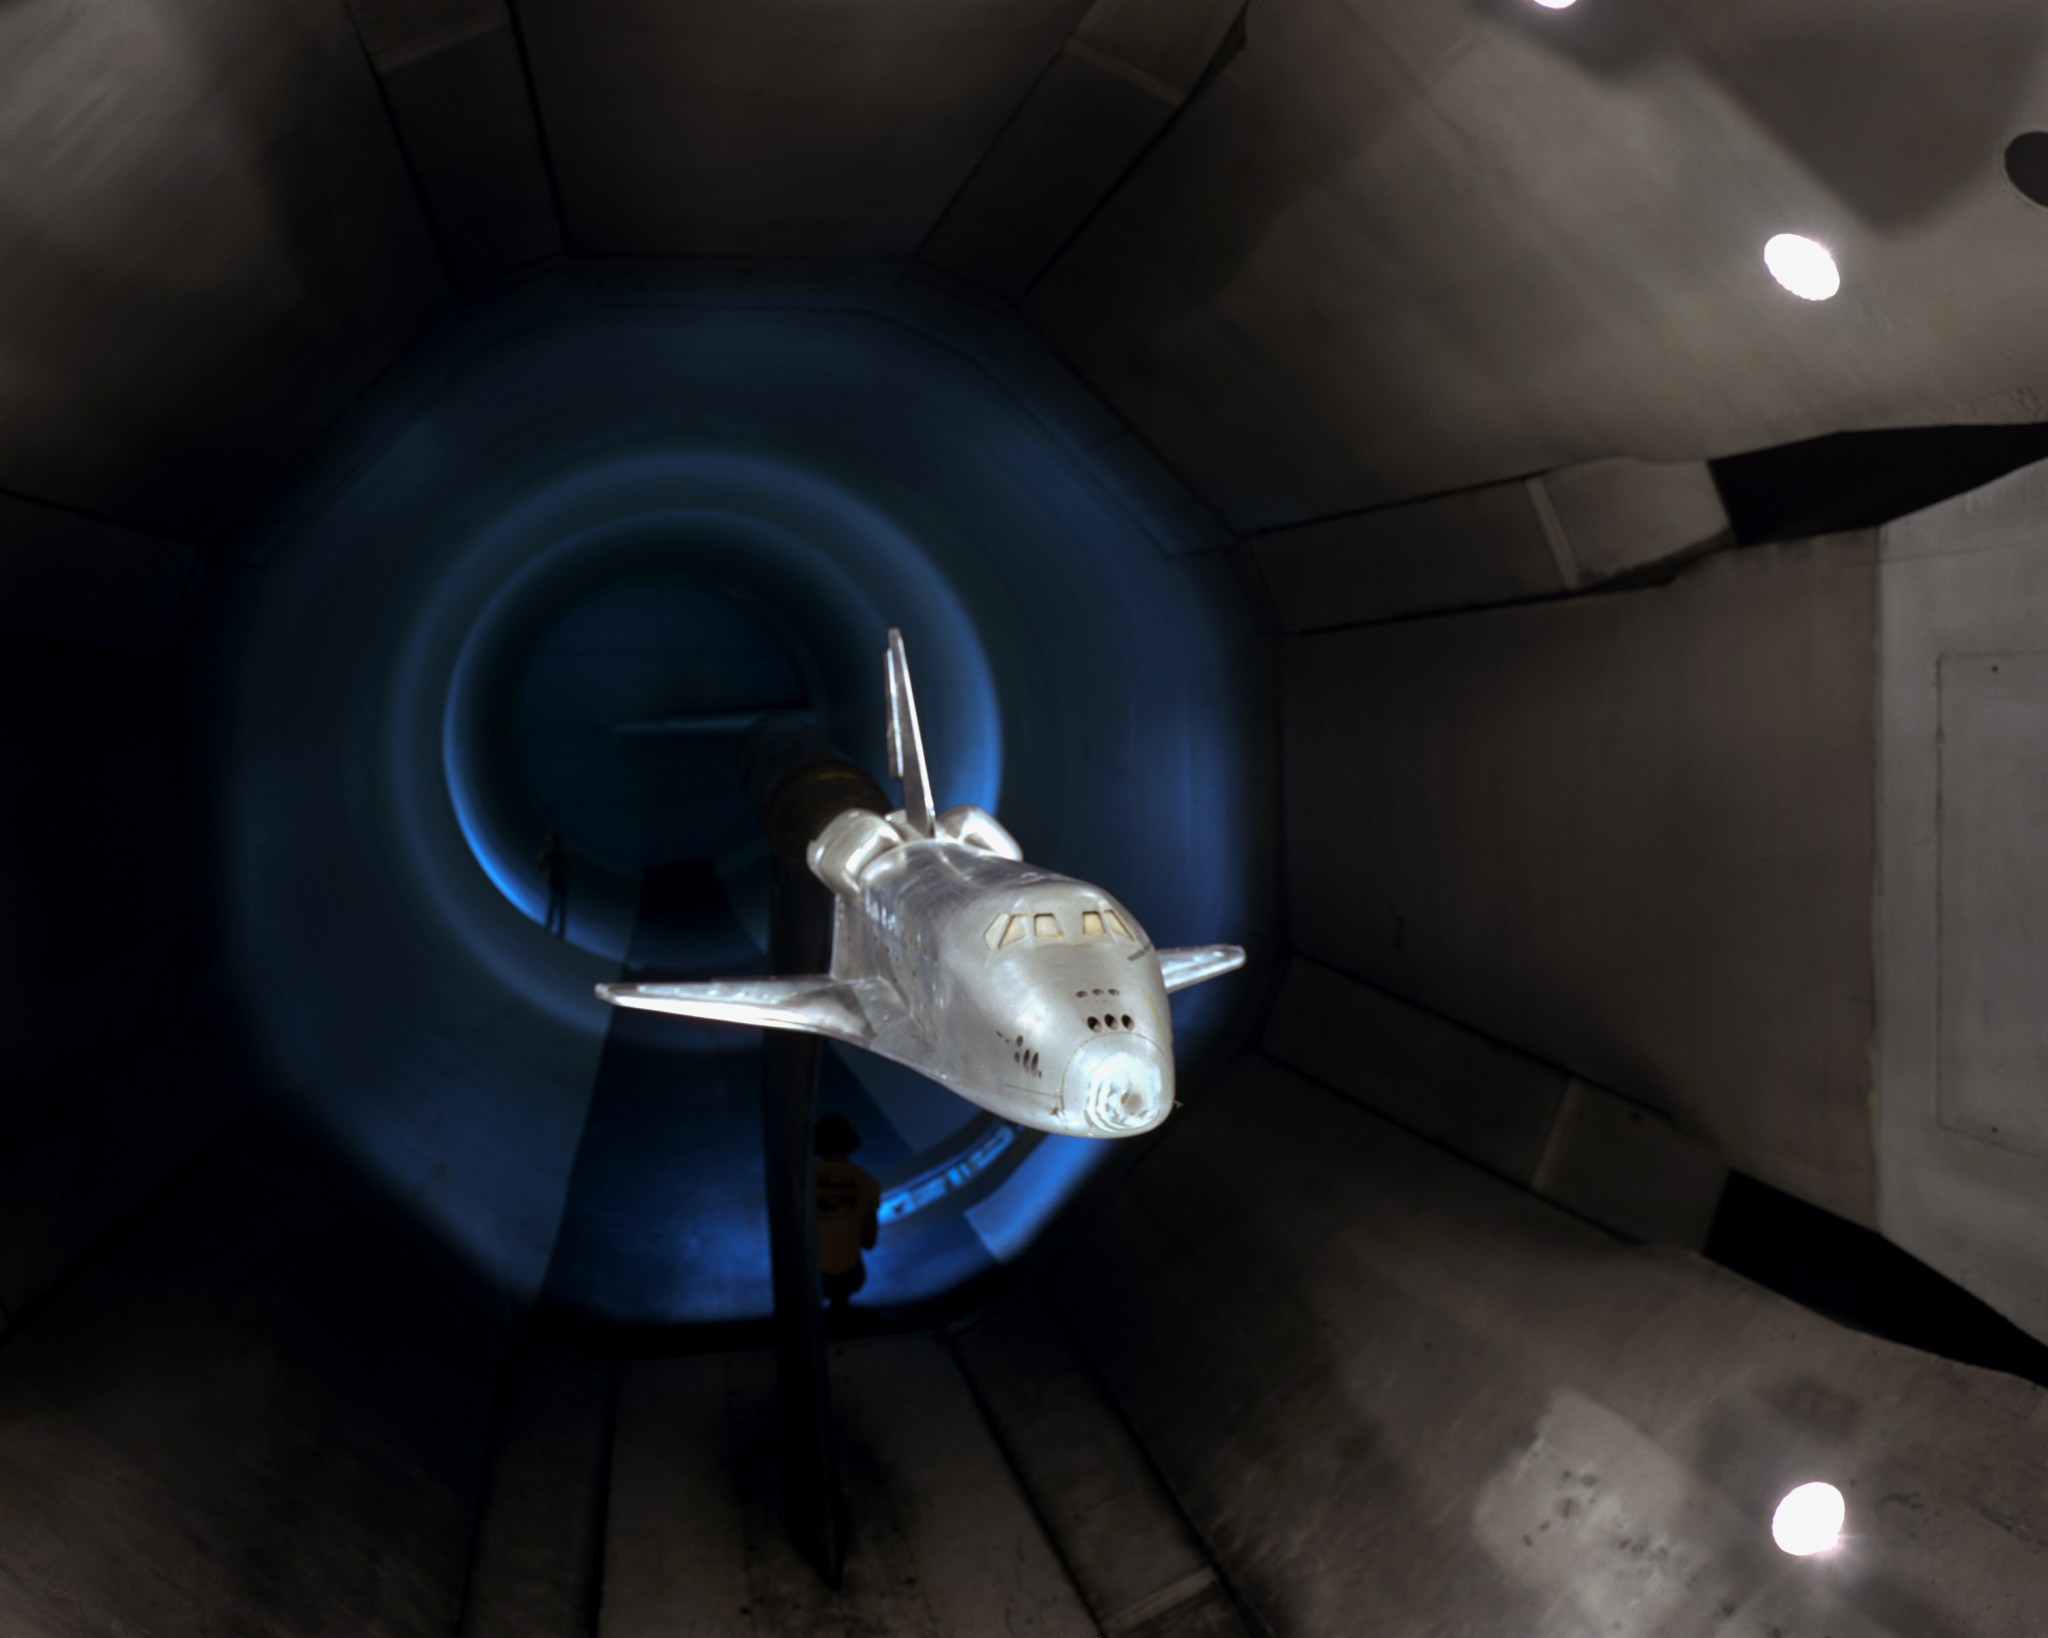 A NASA model of a space shuttle installed in Langley's 16 foot Transonic Tunnel.